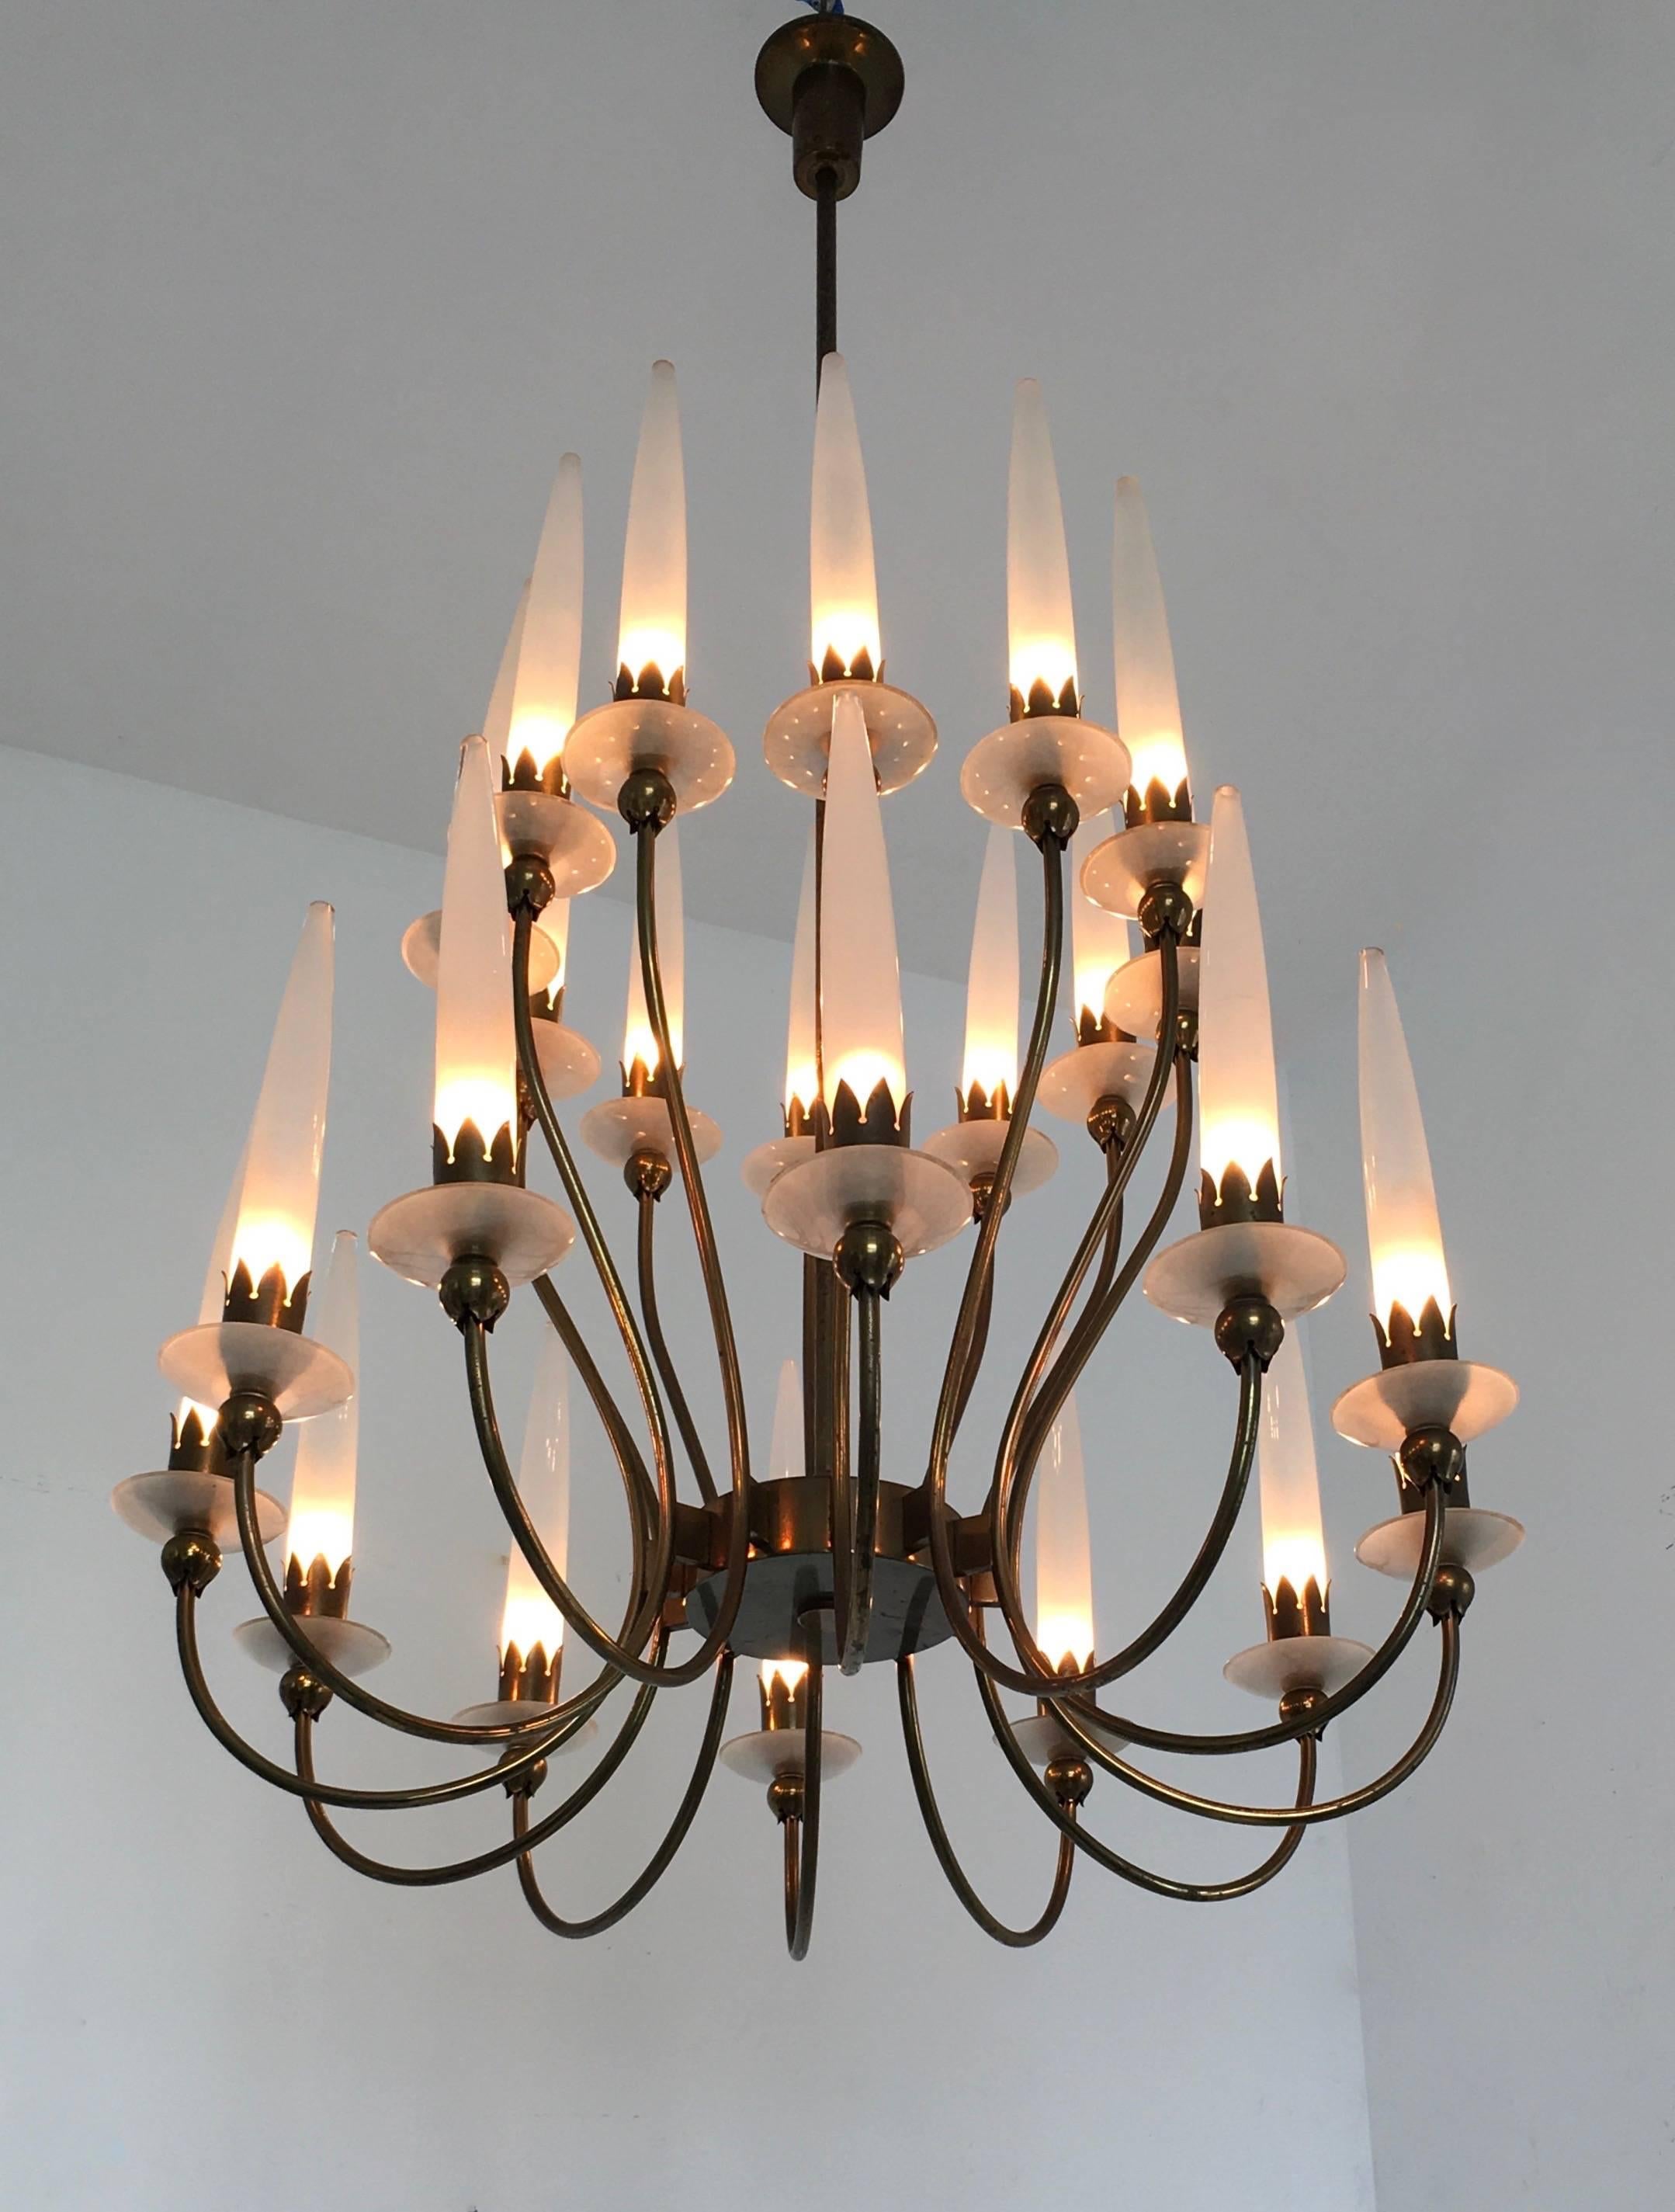 Mid-20th Century Rare 24-Light Chandelier Mod. 12423 by Angelo Lelli for Arredoluce, Italy, 1953